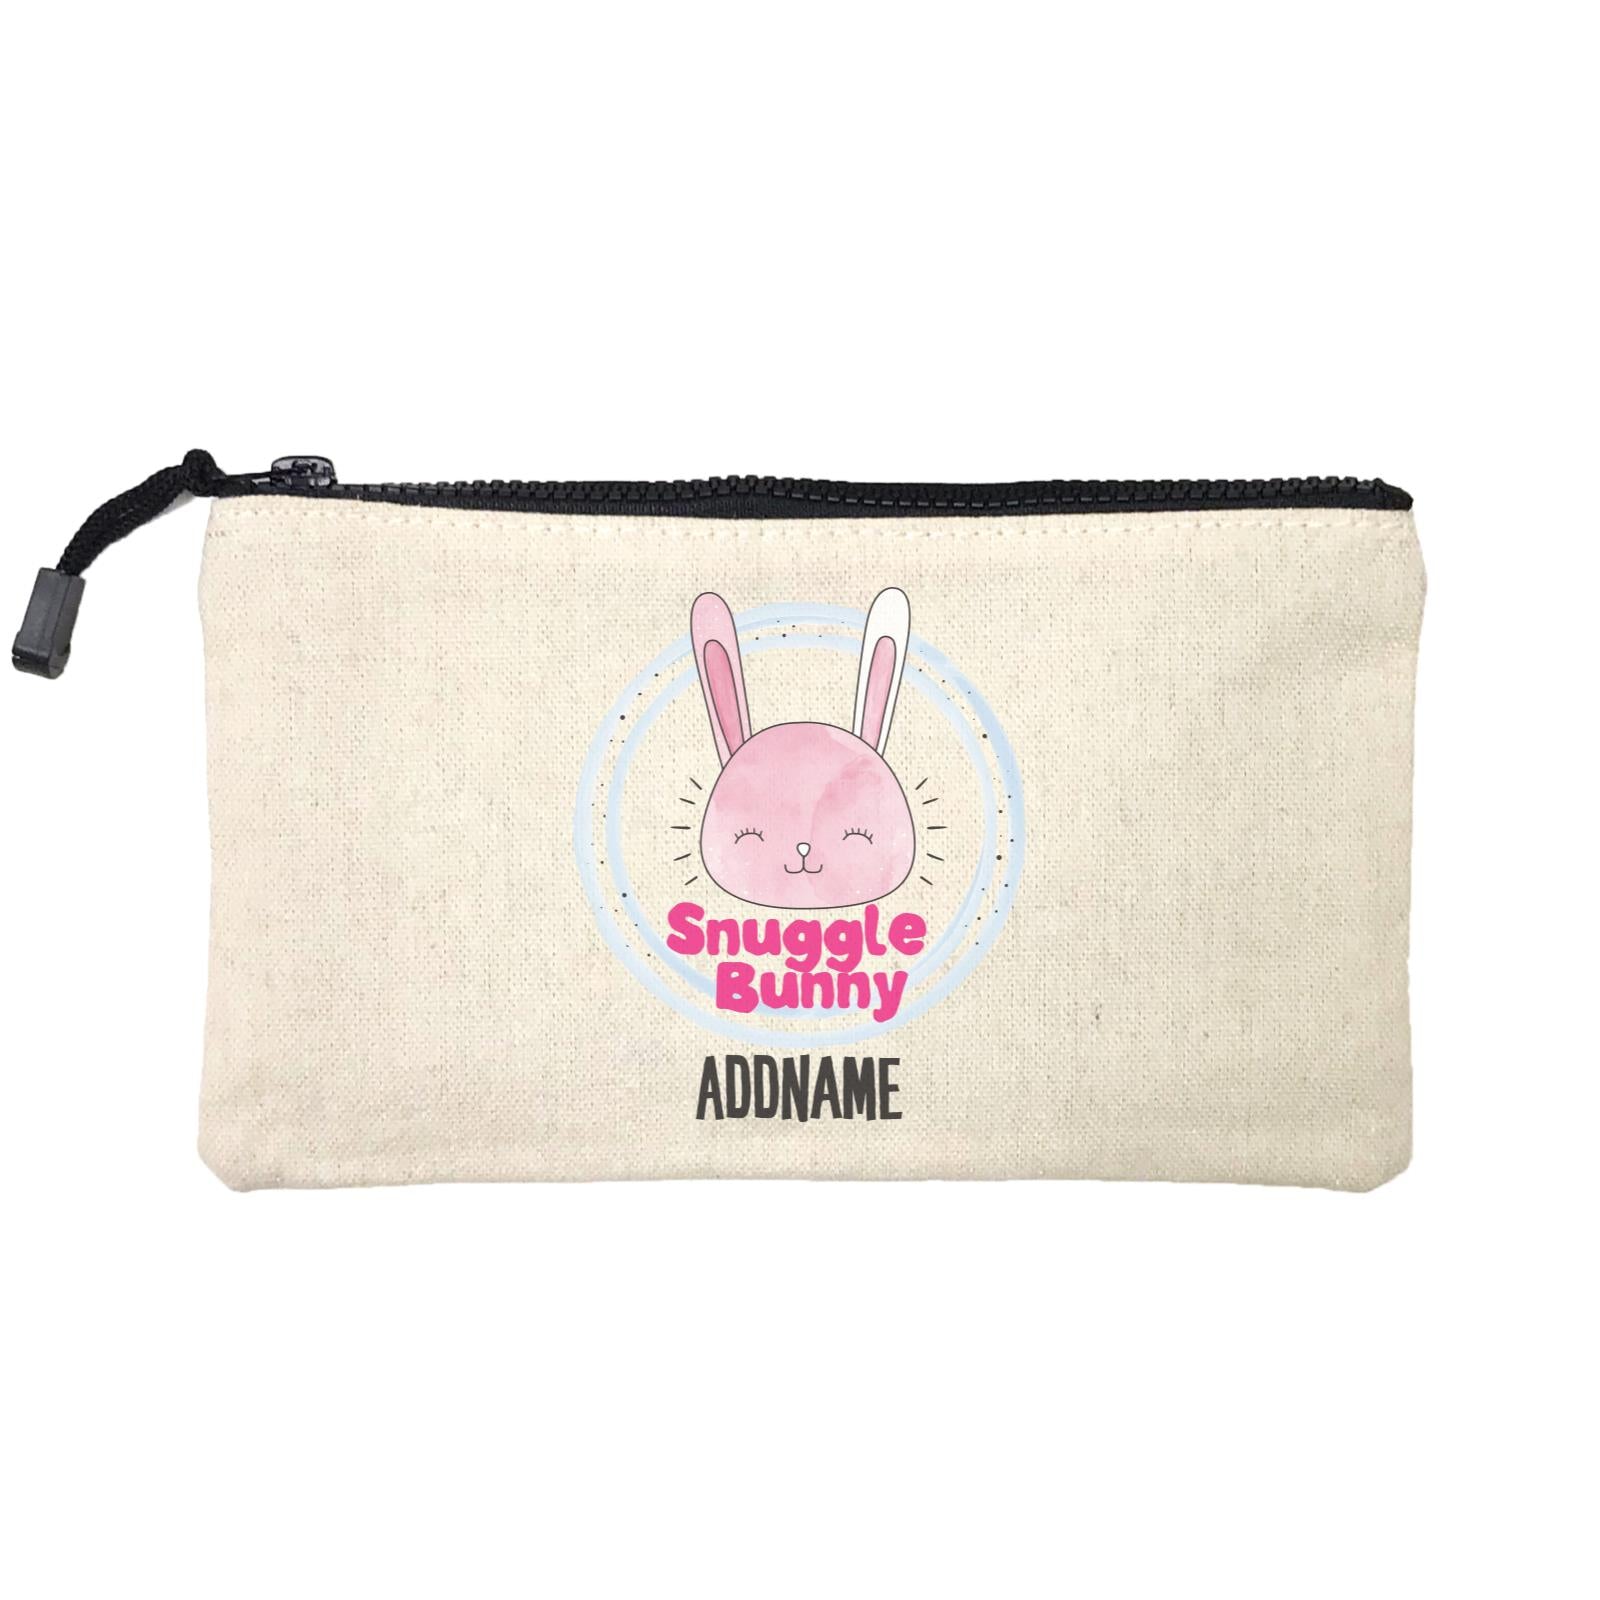 Cool Vibrant Series Snuggle Bunny Addname Mini Accessories Stationery Pouch